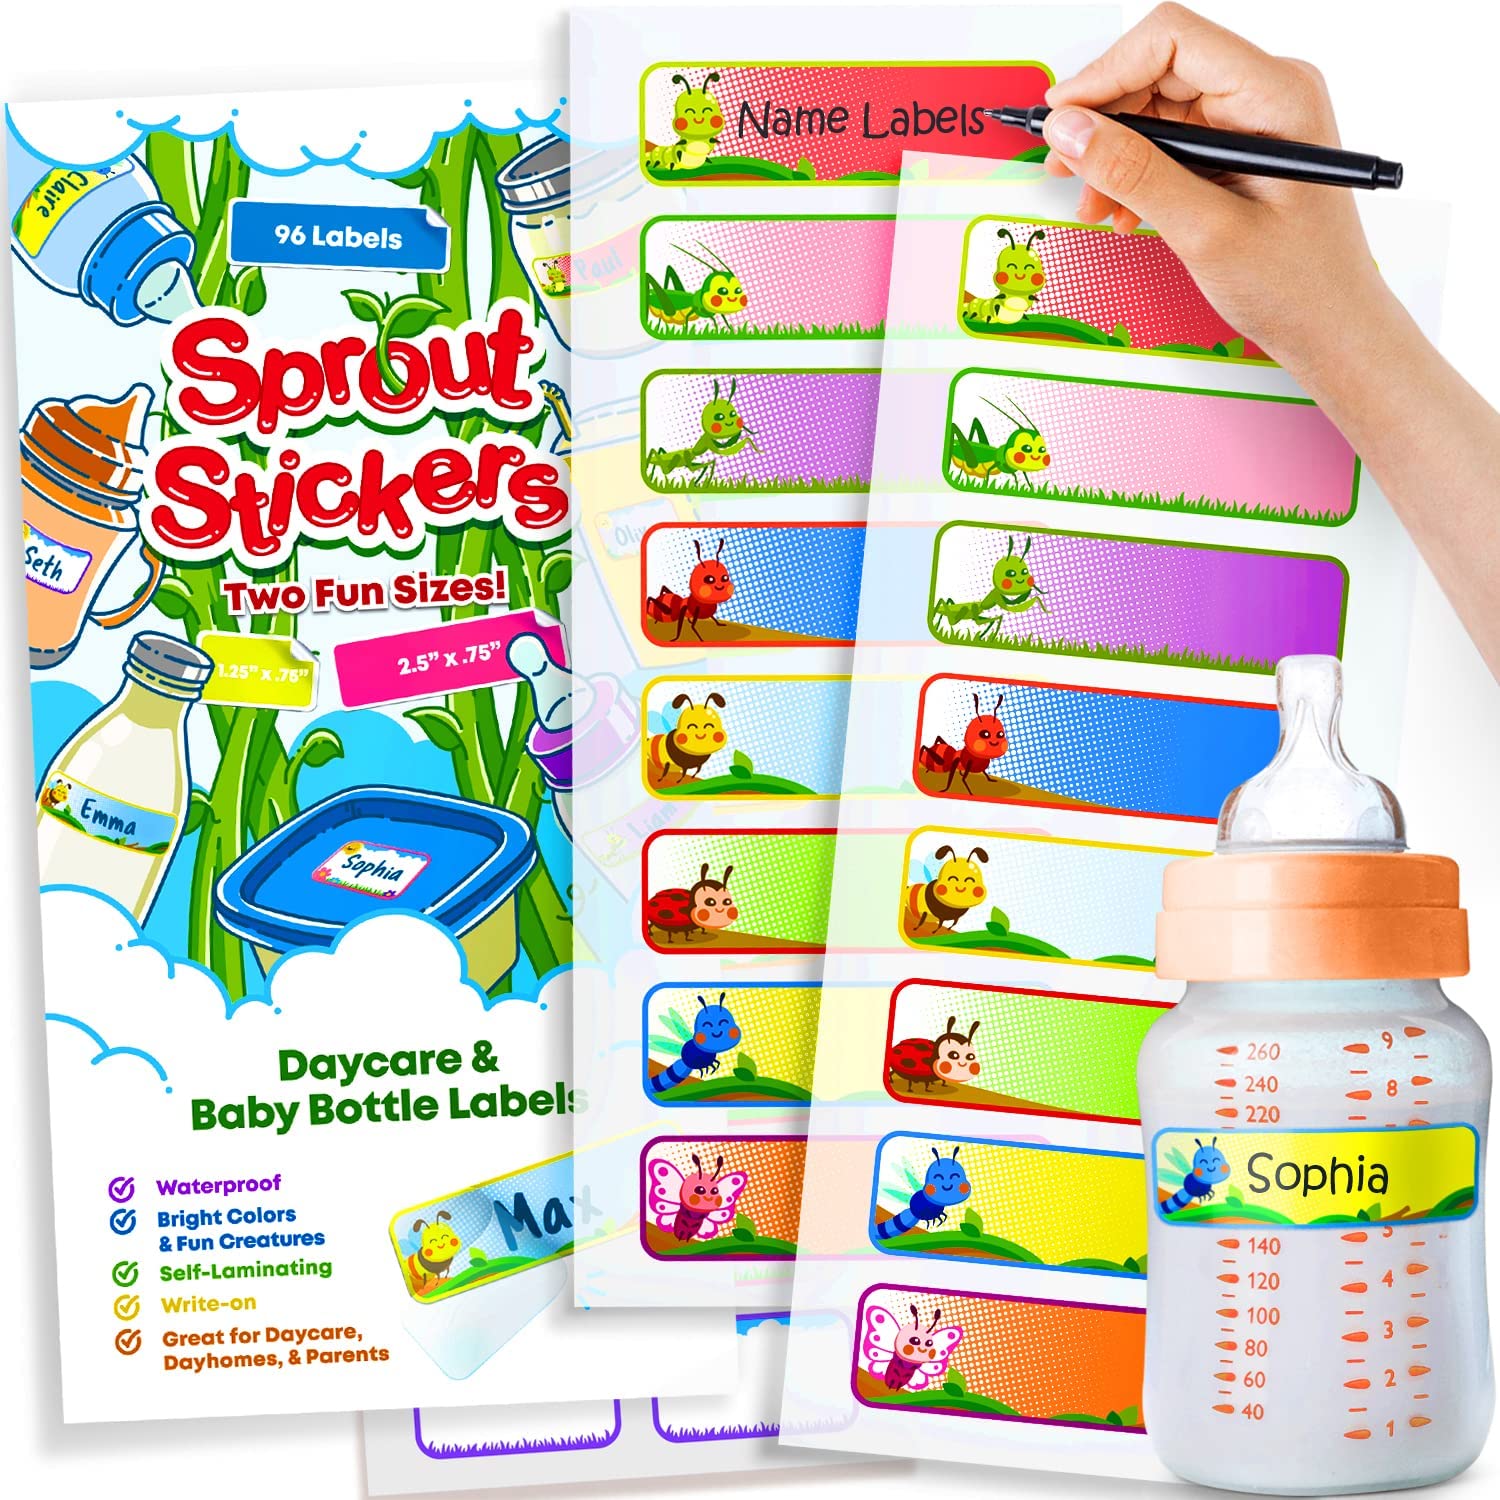 Sprout Stickers Baby Bottle Labels for Kids and Babies - 96 Daycare Labels  - MESS BRANDS